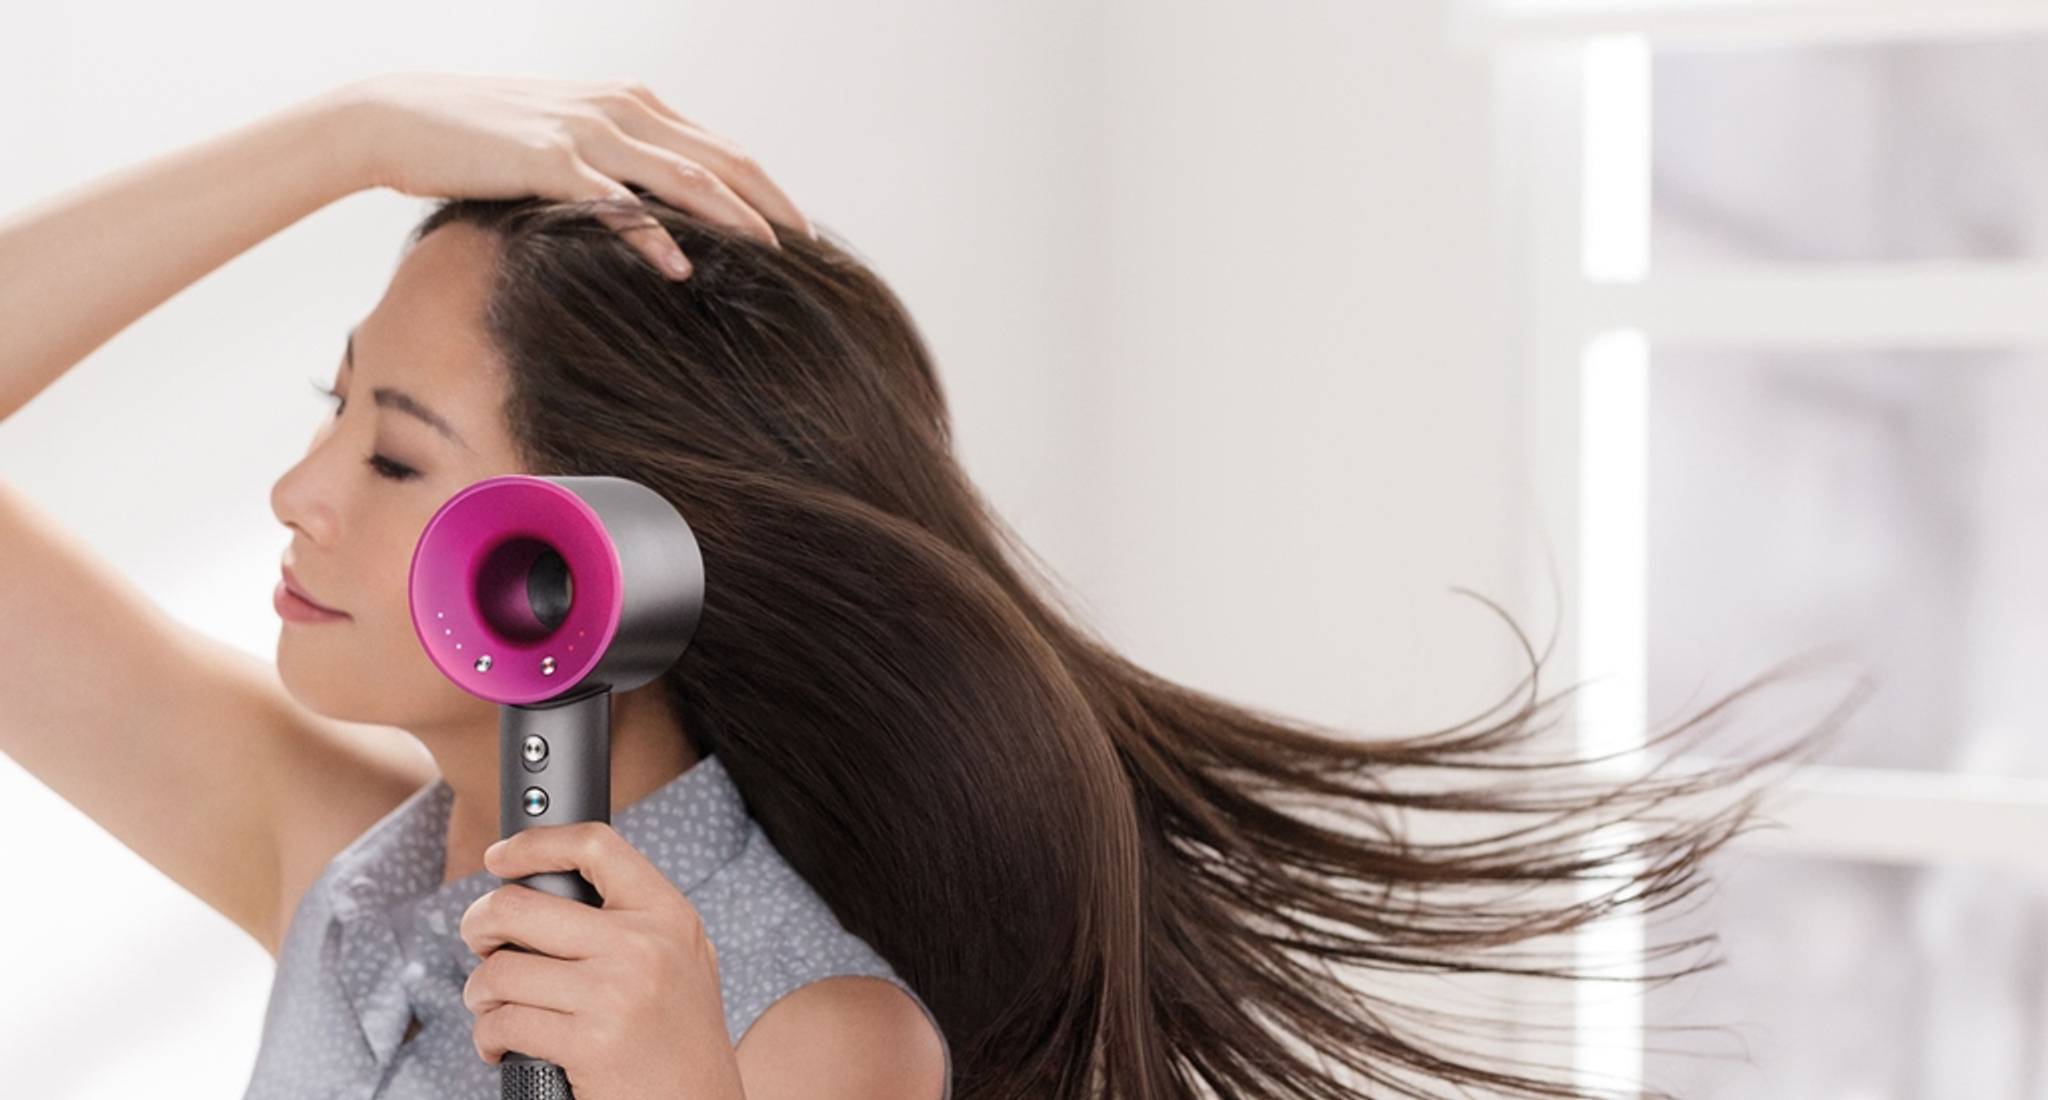 Dyson has launched a supersonic hairdryer